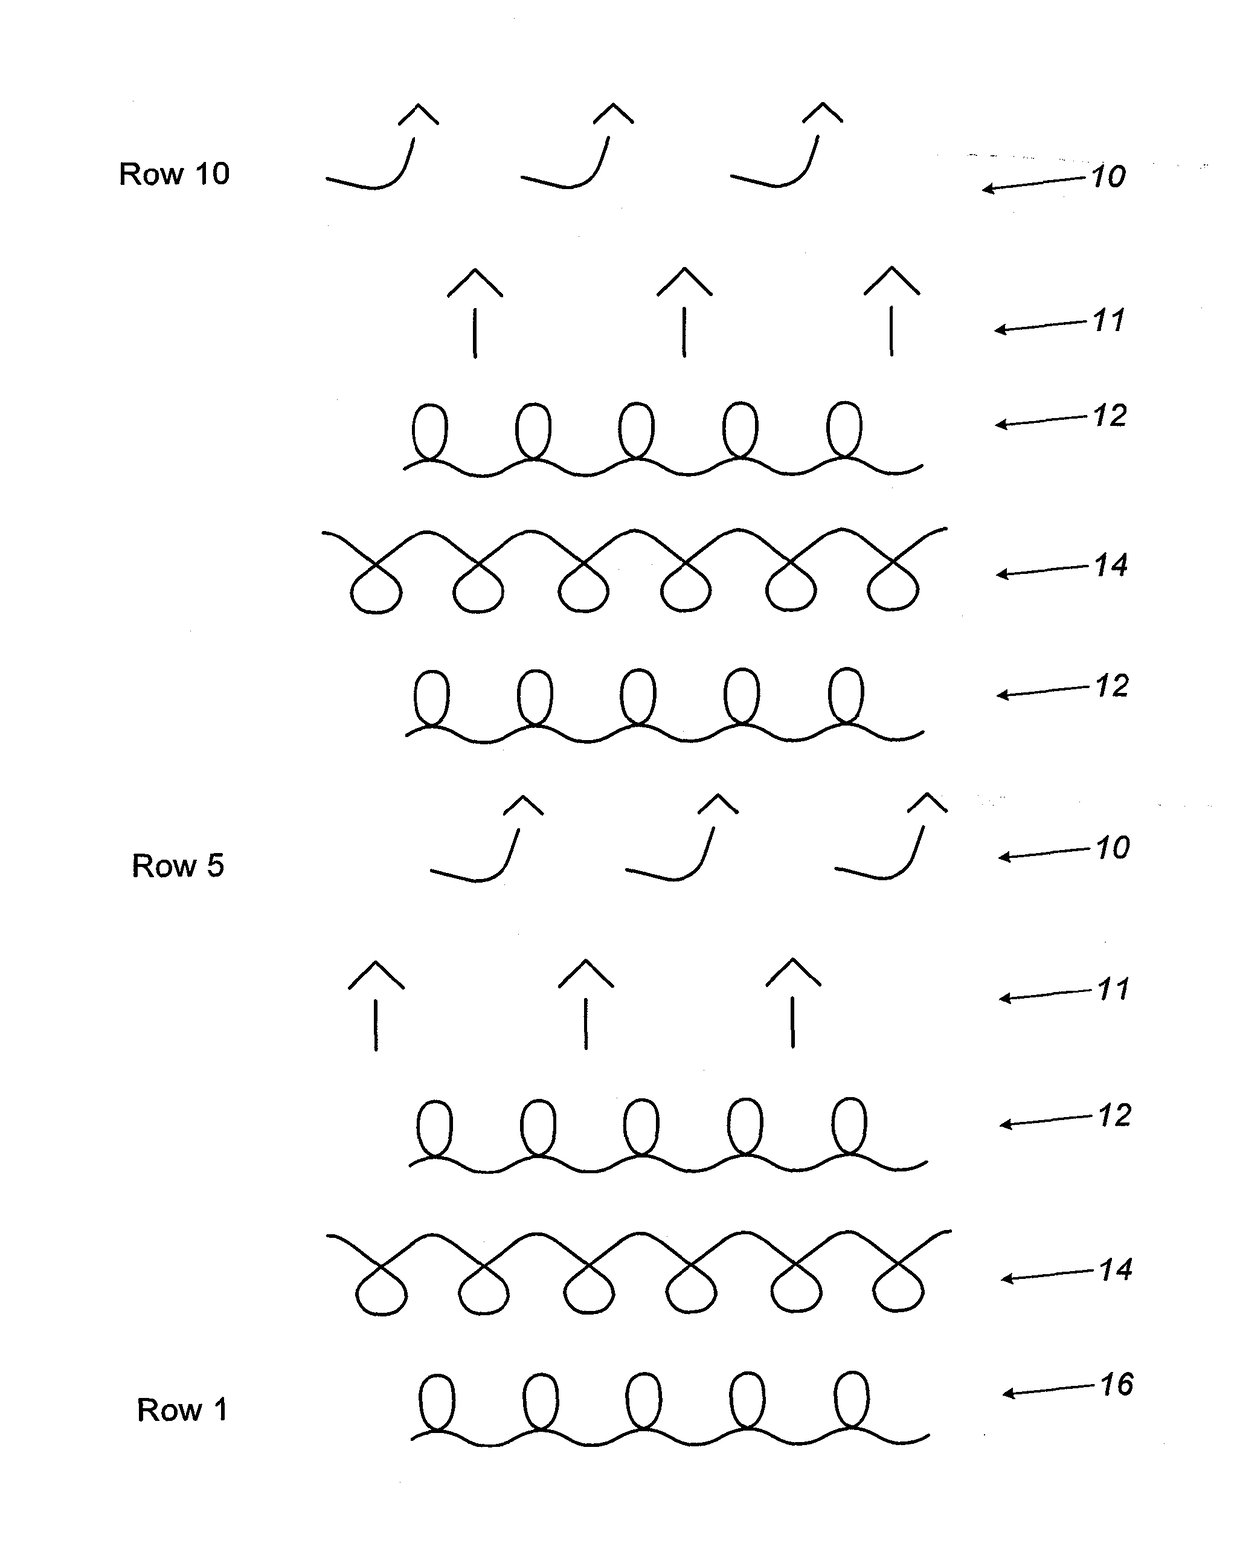 A self-attaching fabric and methods of manufacturing same